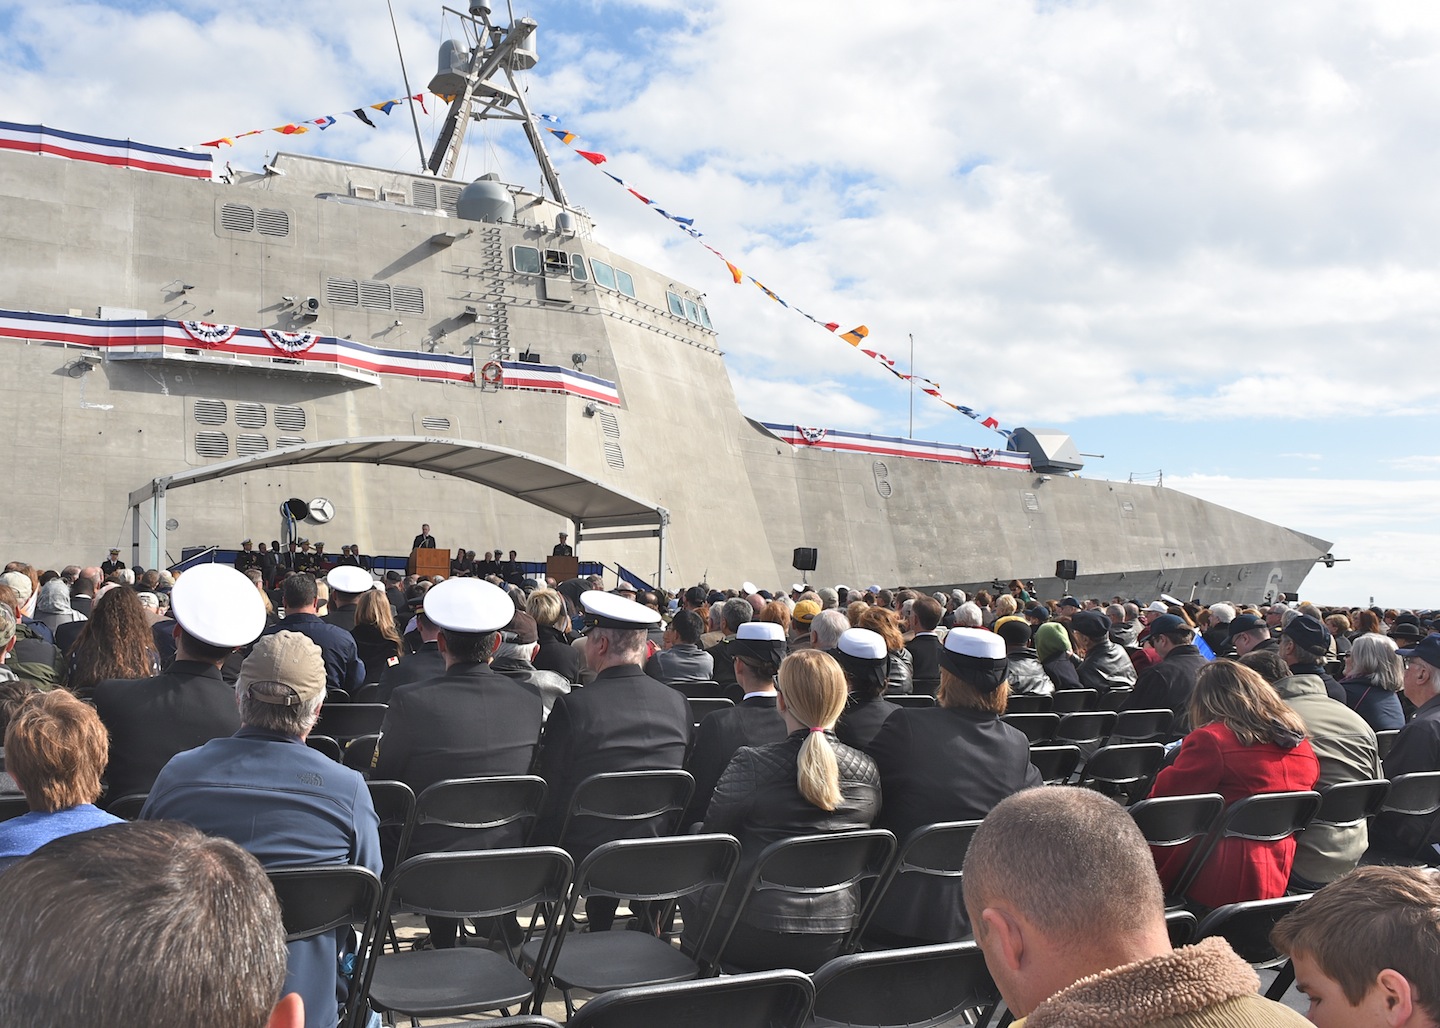 The christening ceremony for the Navy’s littoral combat ship USS Jackson in Gulfport, Miss. in December 2015. (U.S. Navy photo by Chief Mass Communication Specialist Sam Shavers)